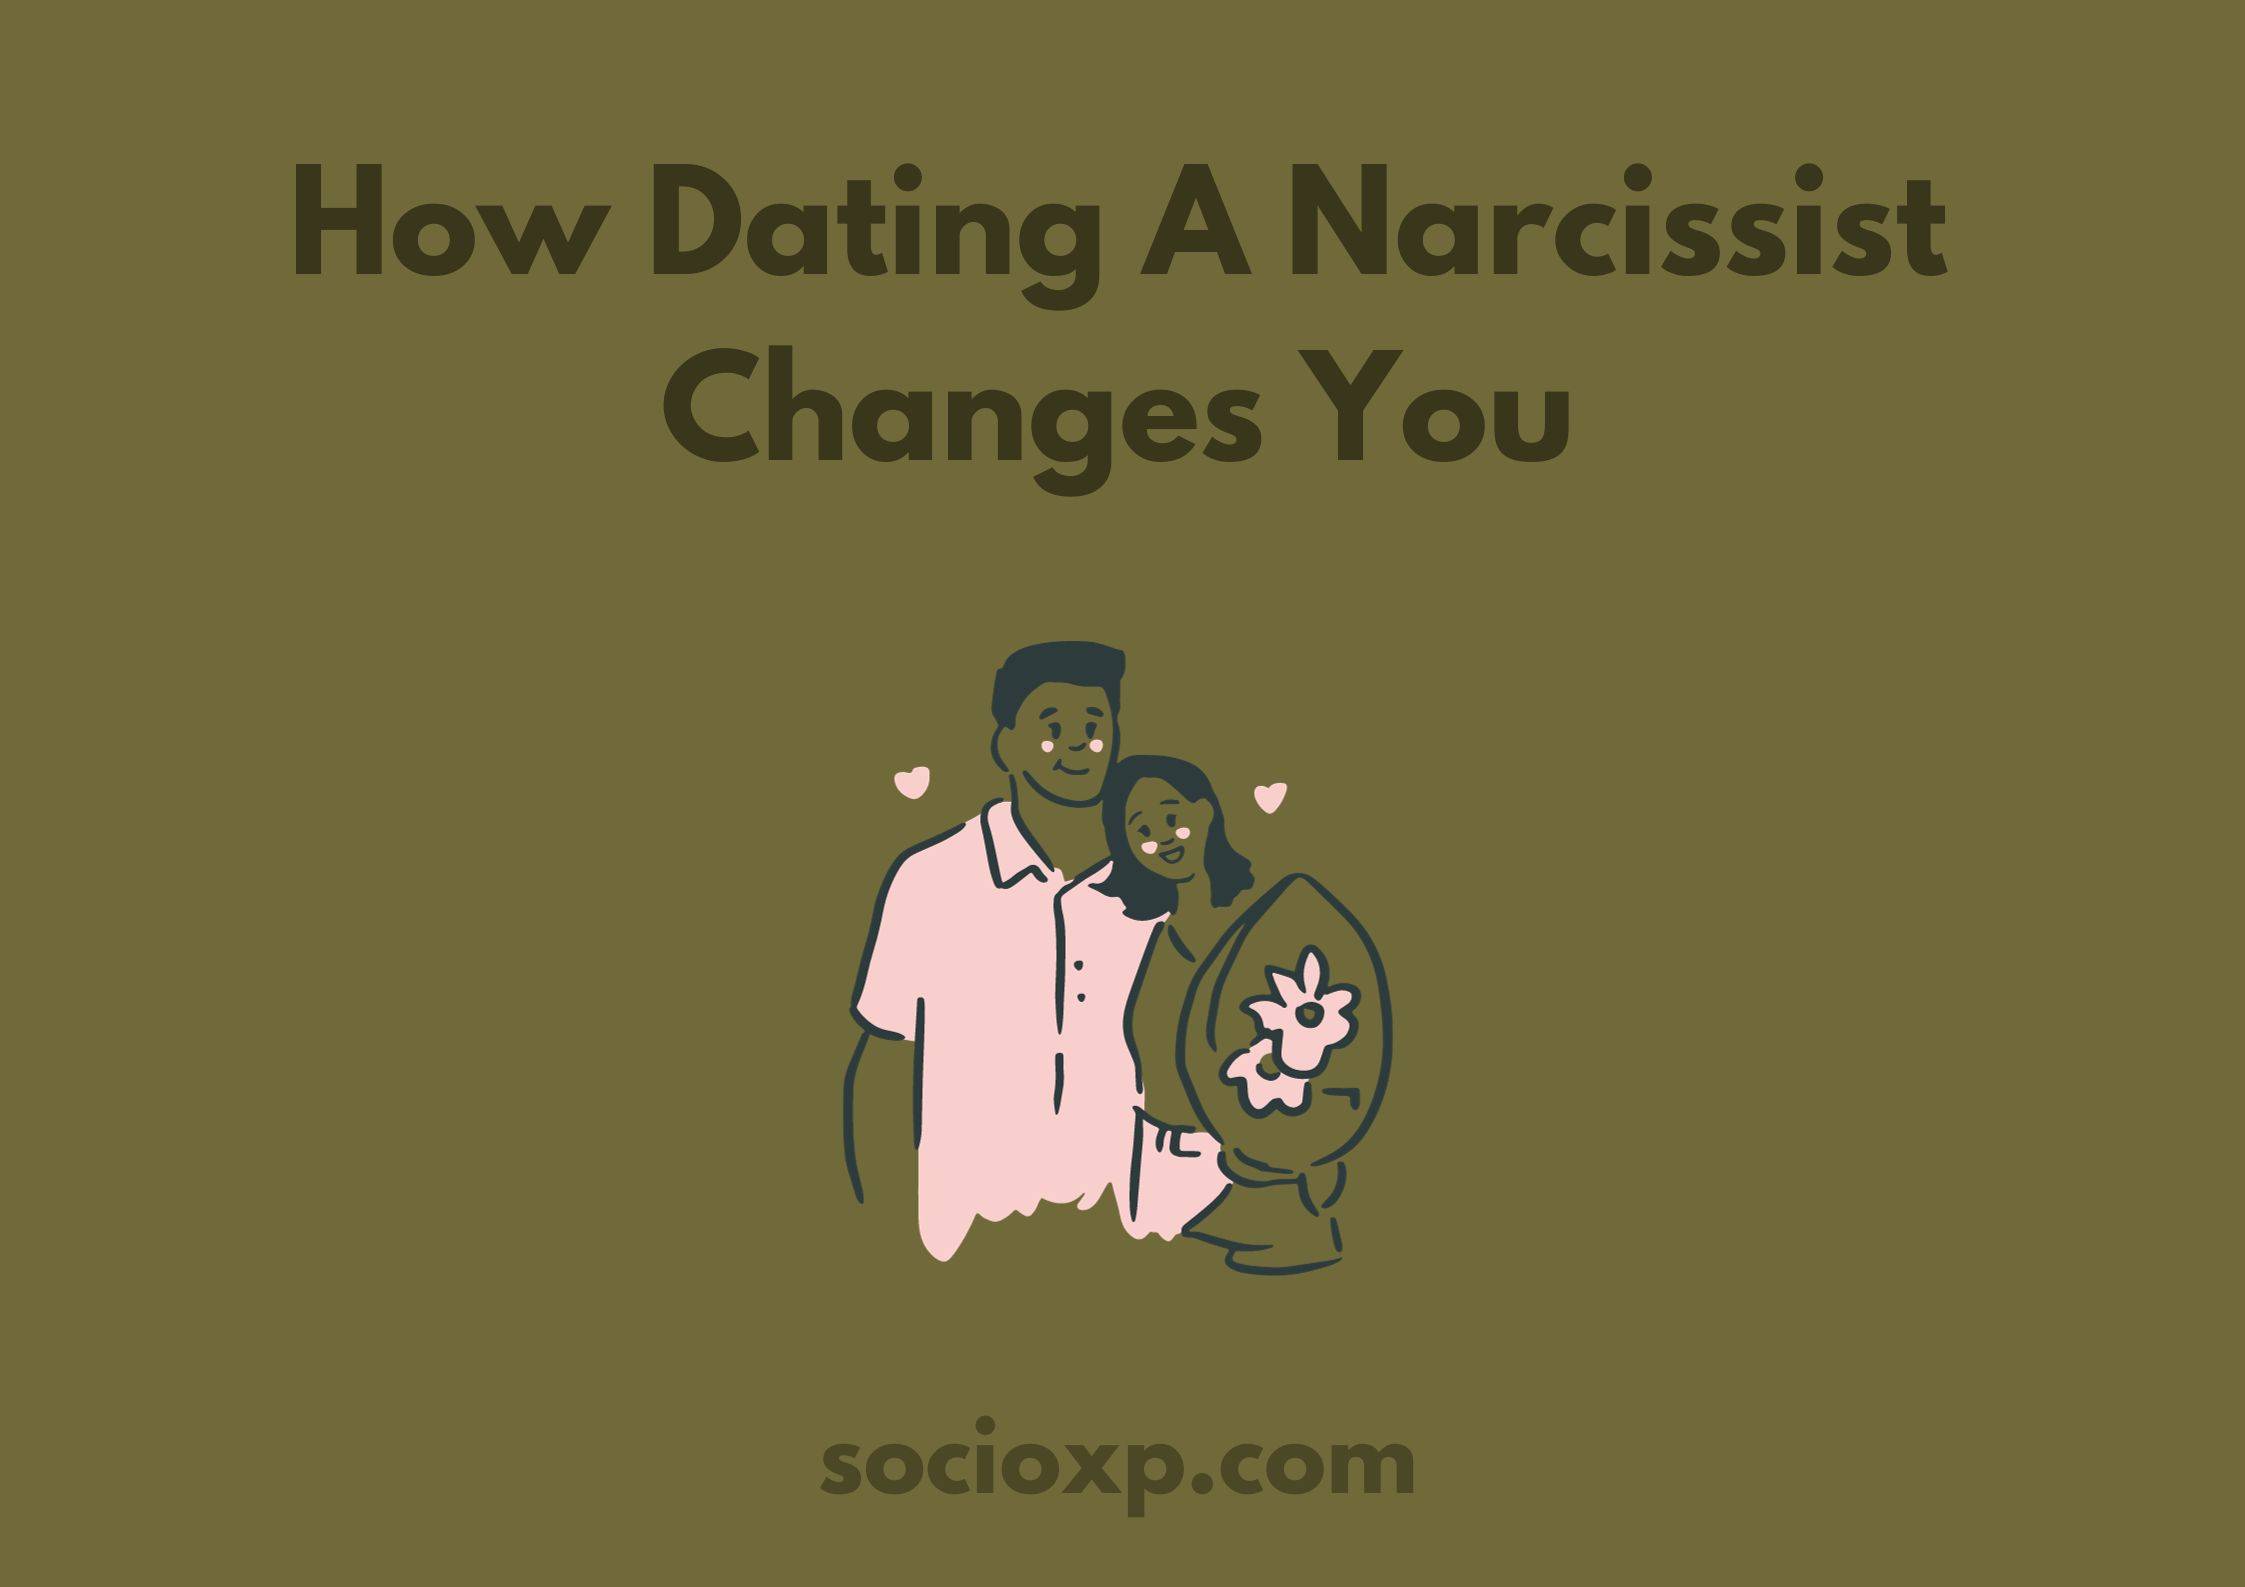 How Dating A Narcissist Changes You